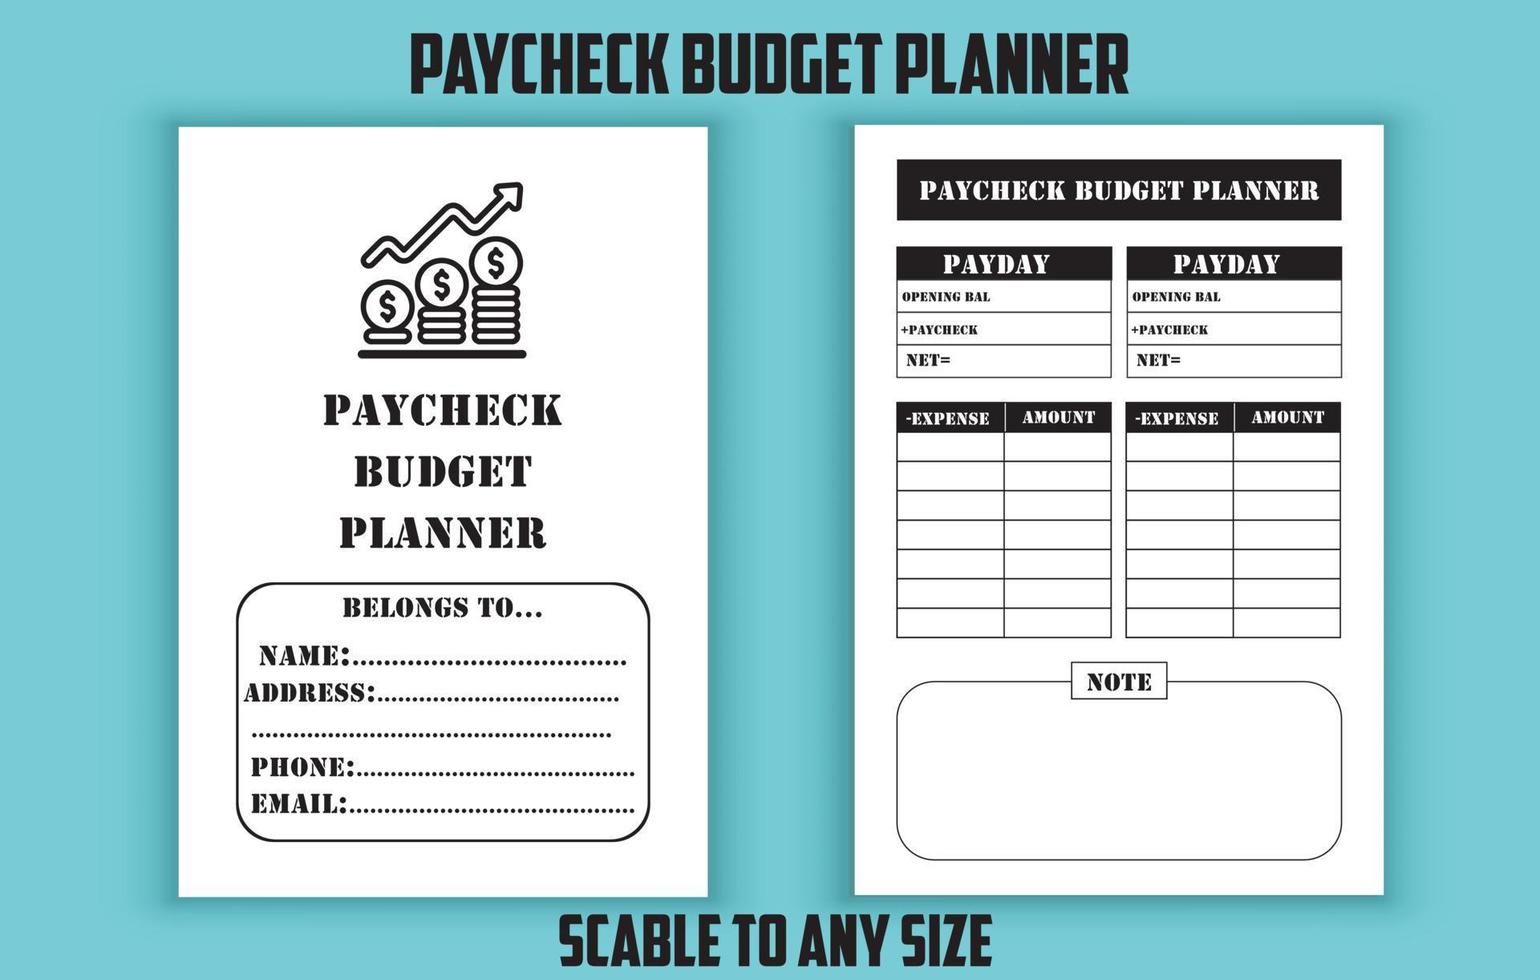 Paycheck budget planner editable template vector